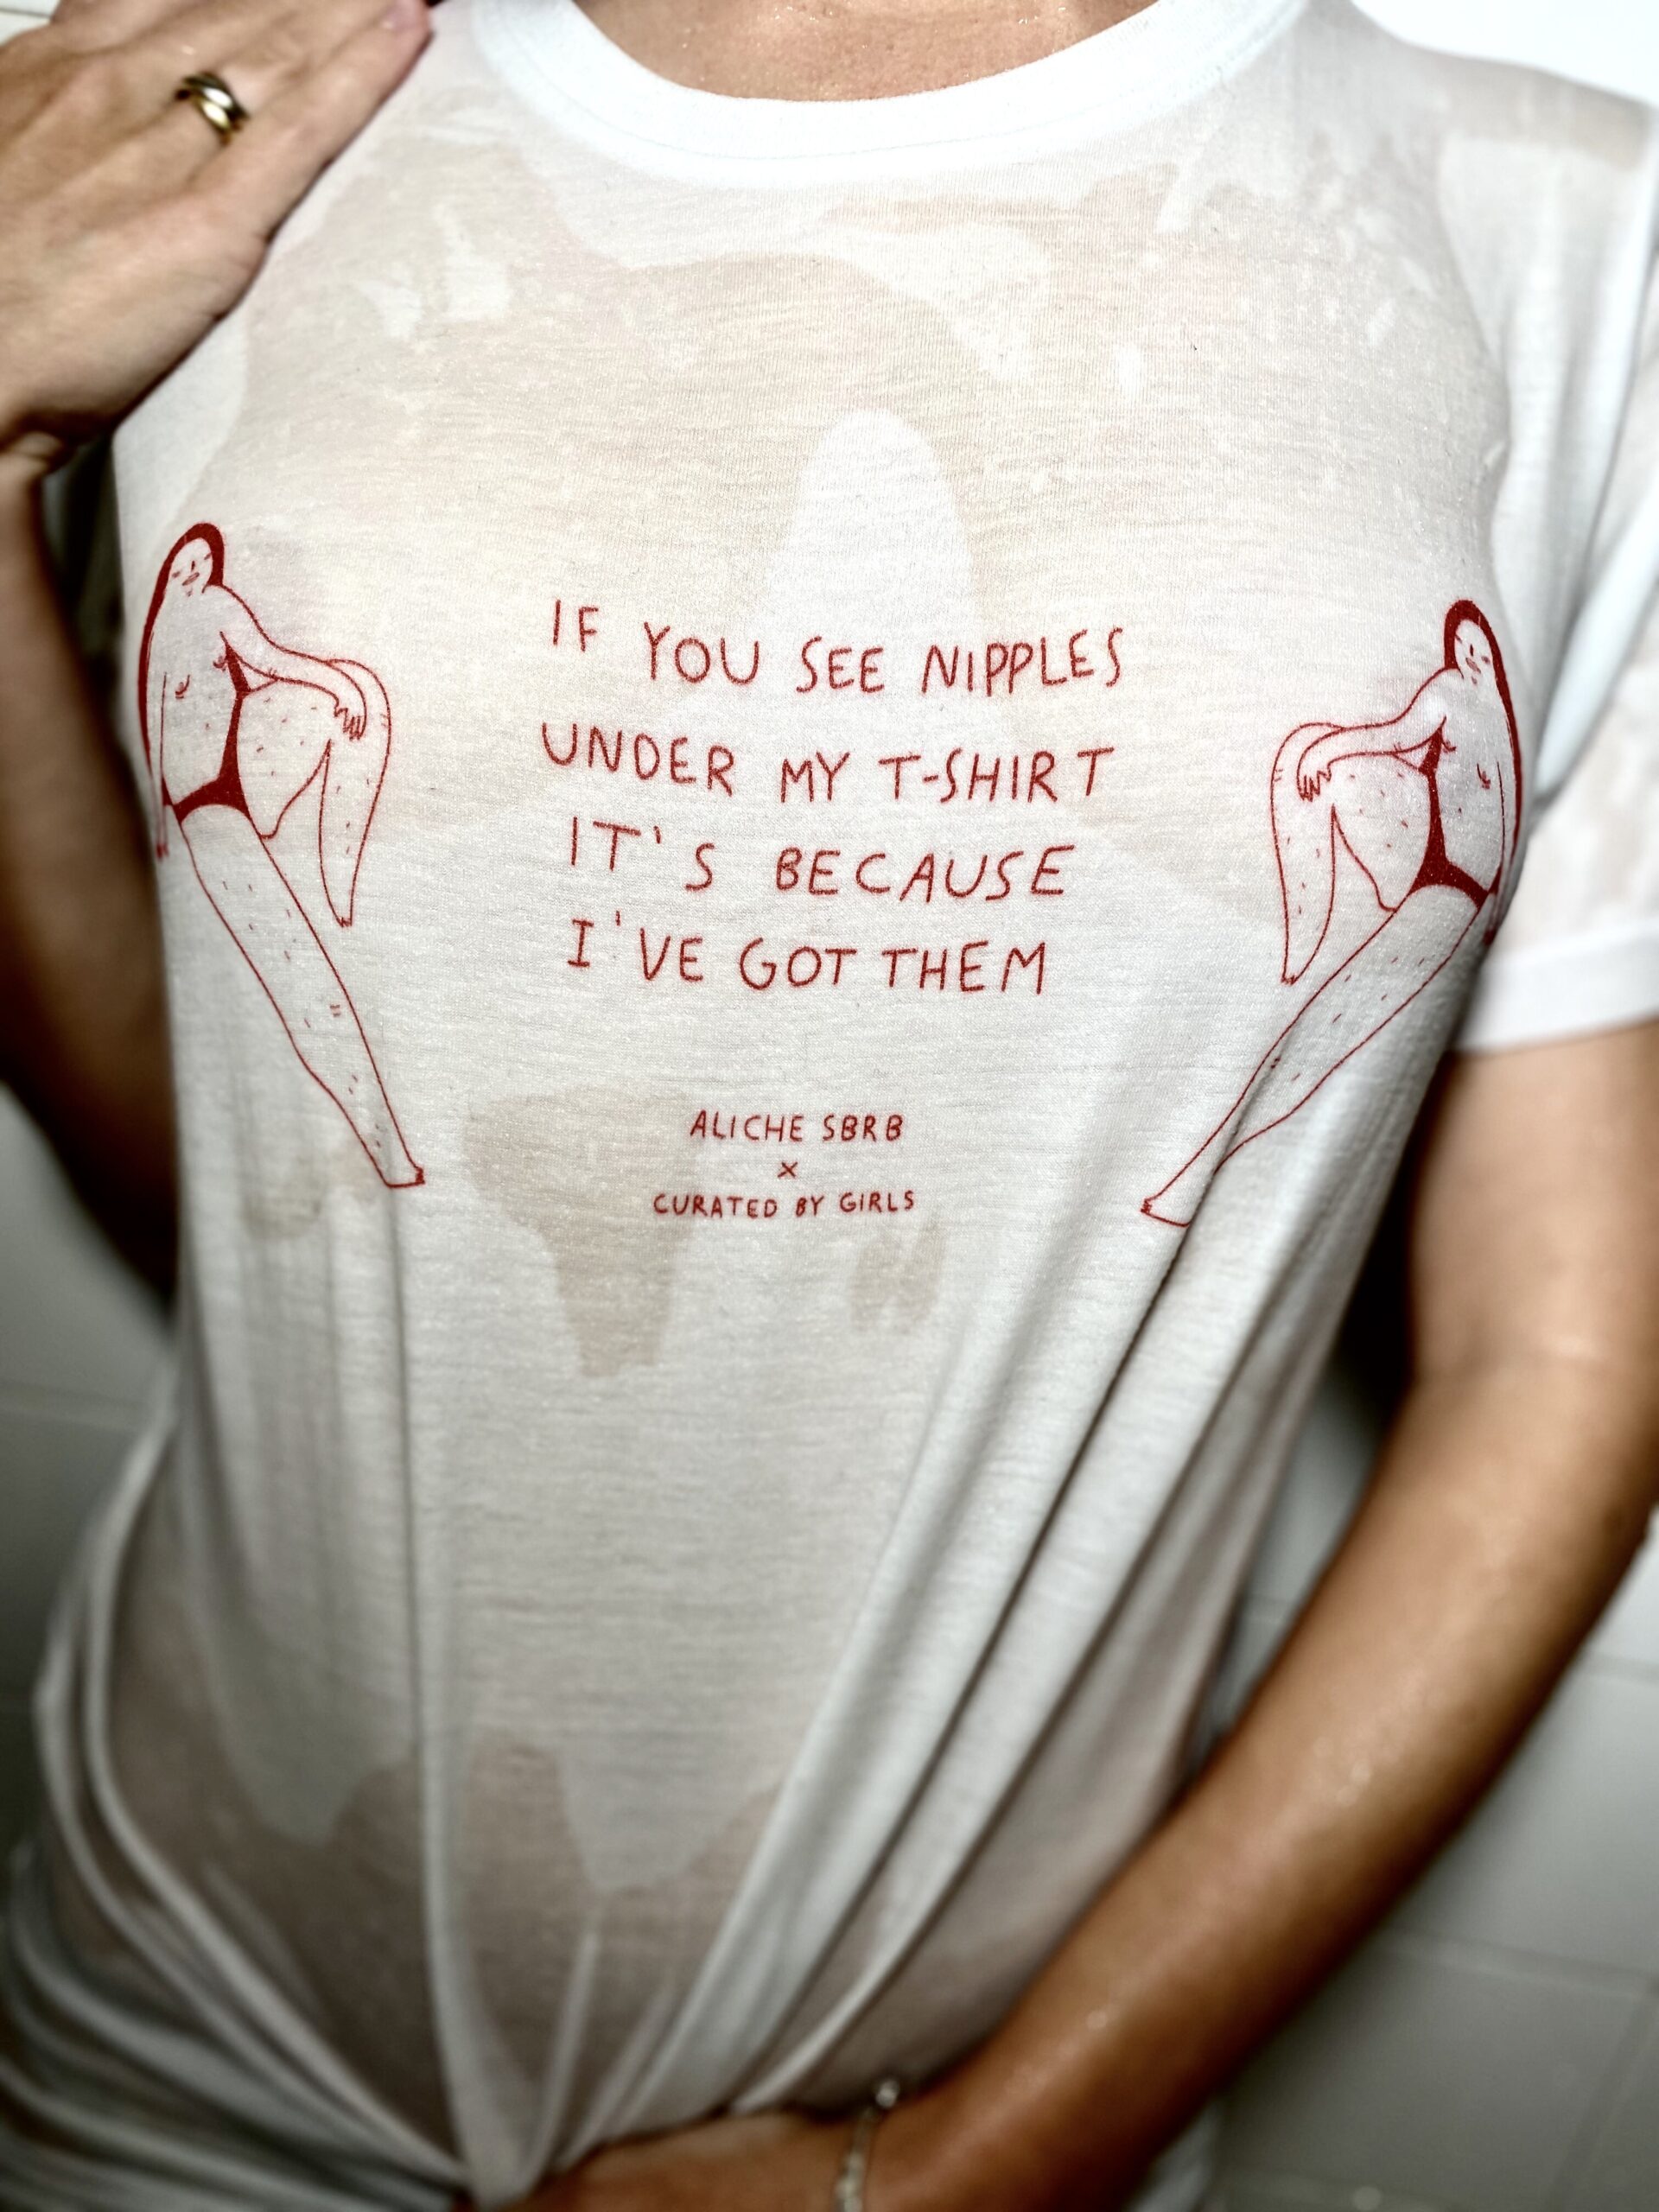 bagus ariono recommends nipples through t shirt pic